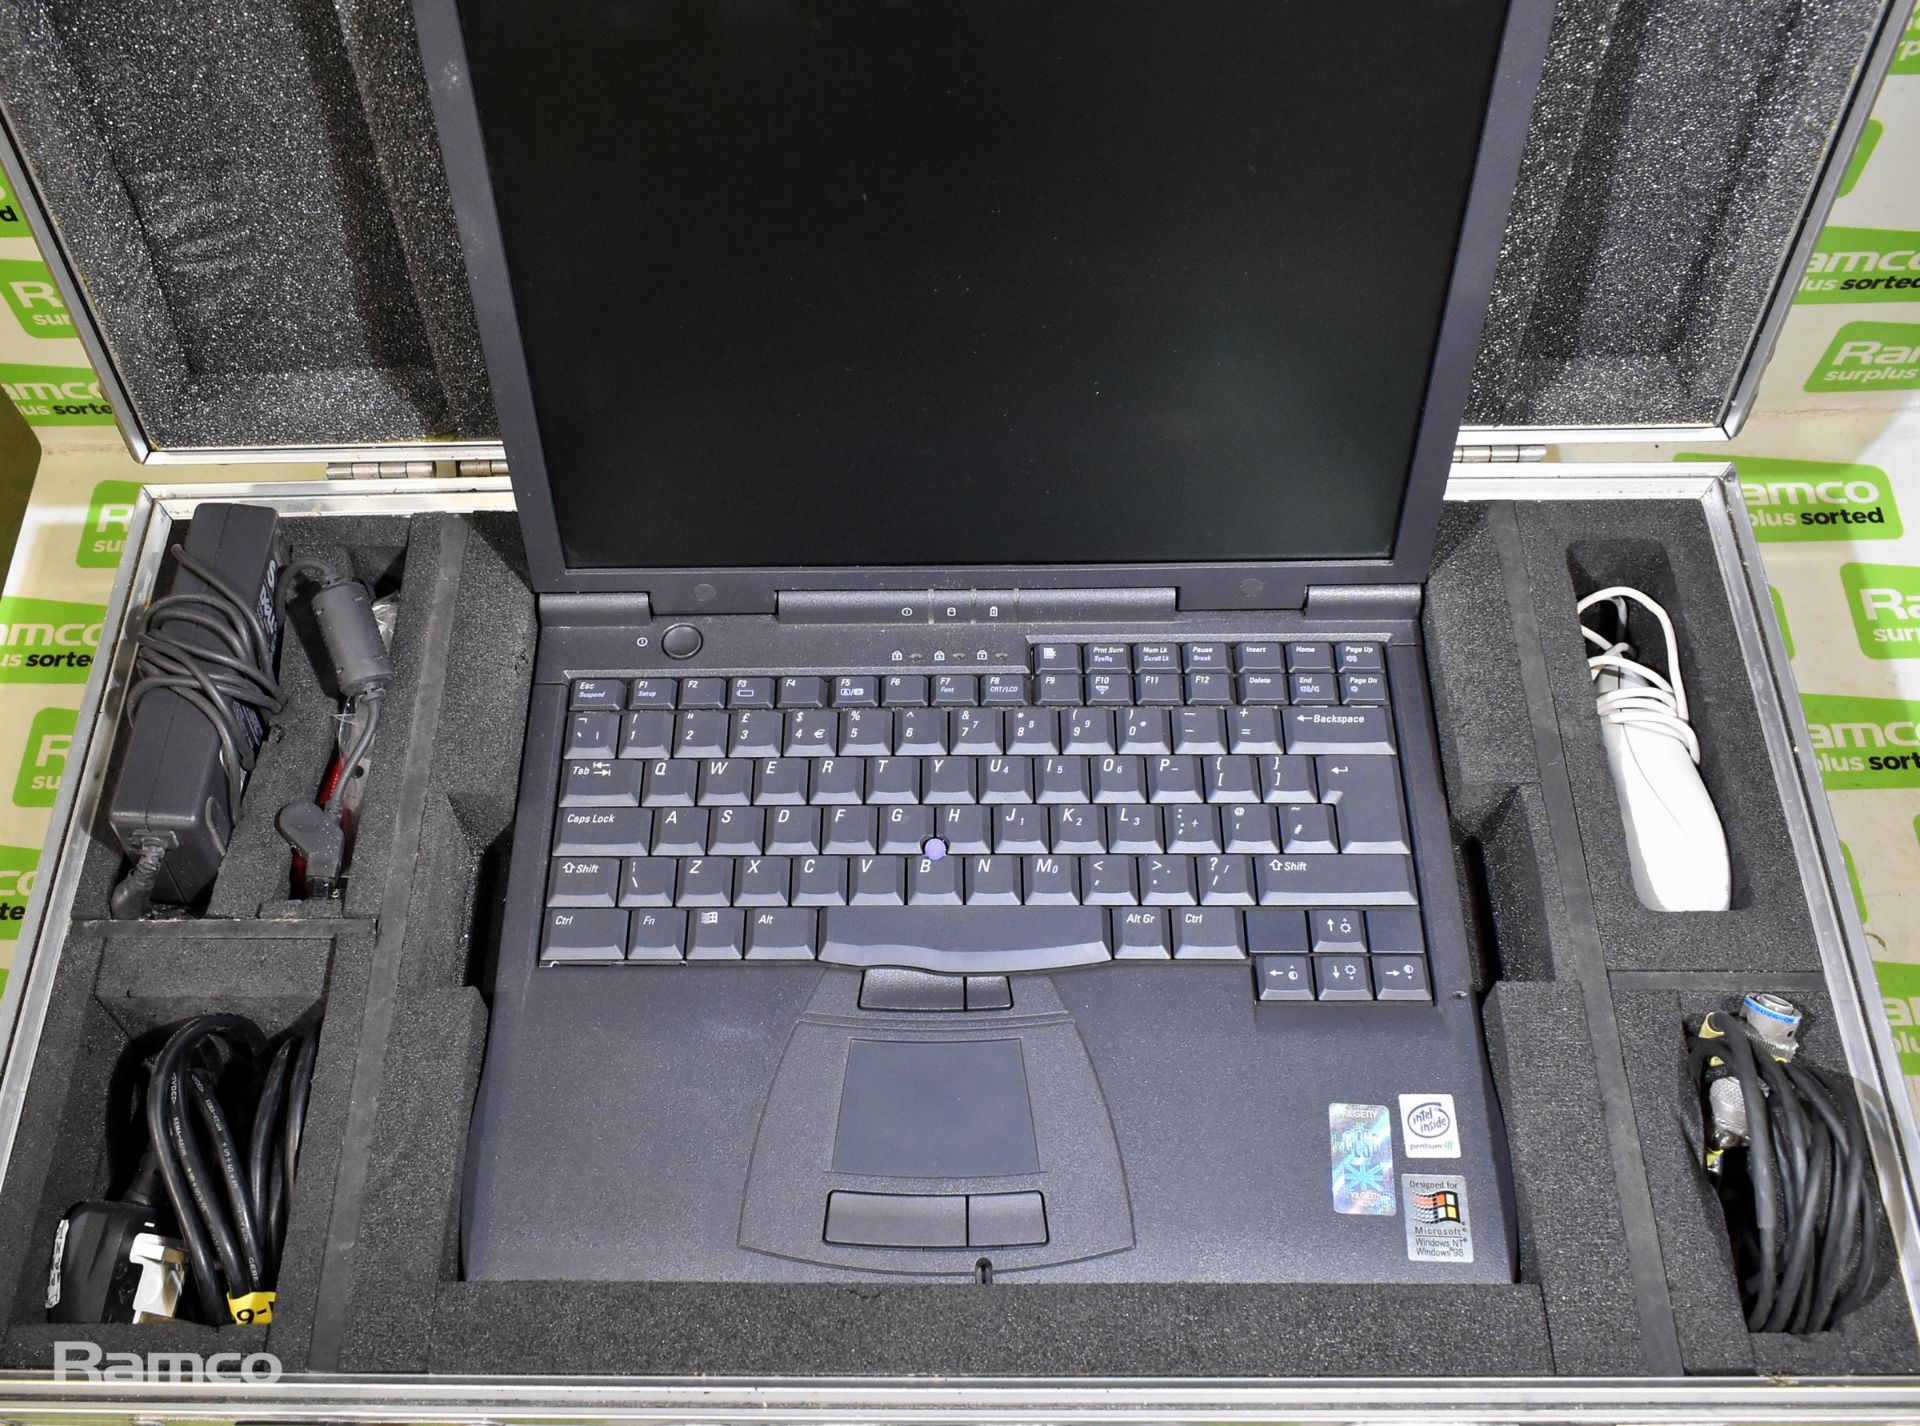 Dell Latitude CPx laptop with accessories and aluminium case - Image 2 of 8